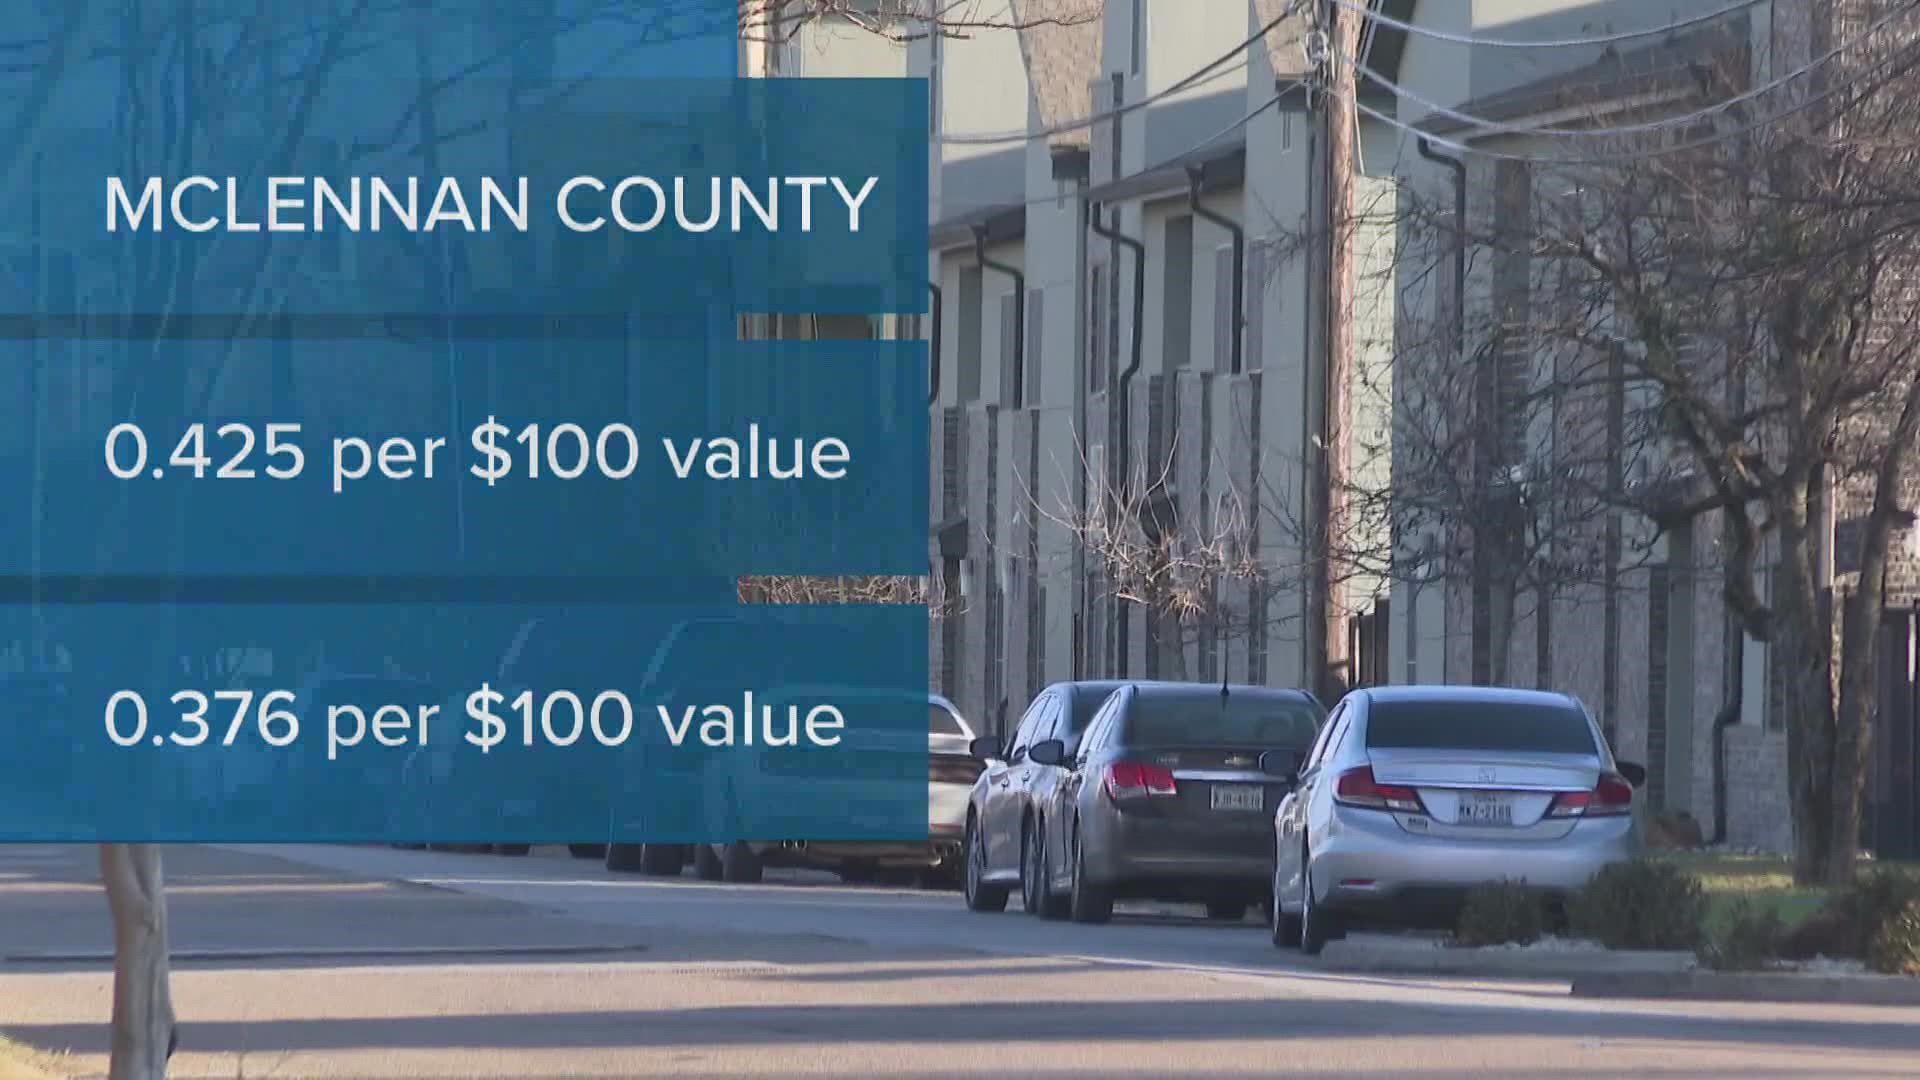 Some Central Texas cities and counties are planning to lower their tax rate.